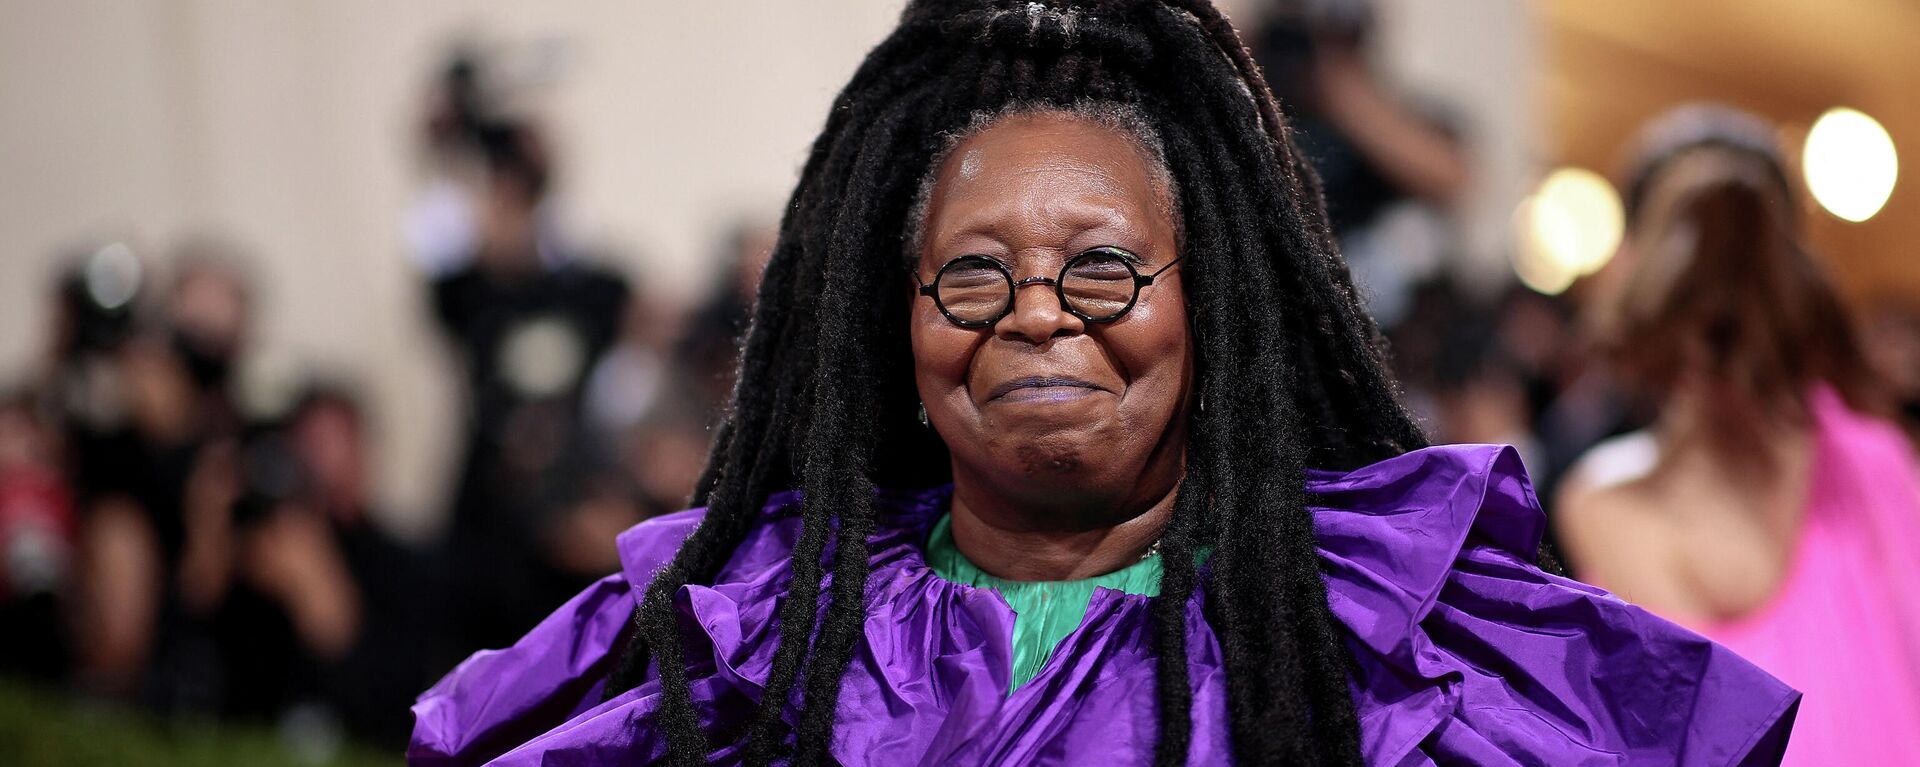 Whoopi Goldberg attends The 2021 Met Gala Celebrating In America: A Lexicon Of Fashion at Metropolitan Museum of Art on September 13, 2021 in New York City.  - Sputnik International, 1920, 08.11.2022